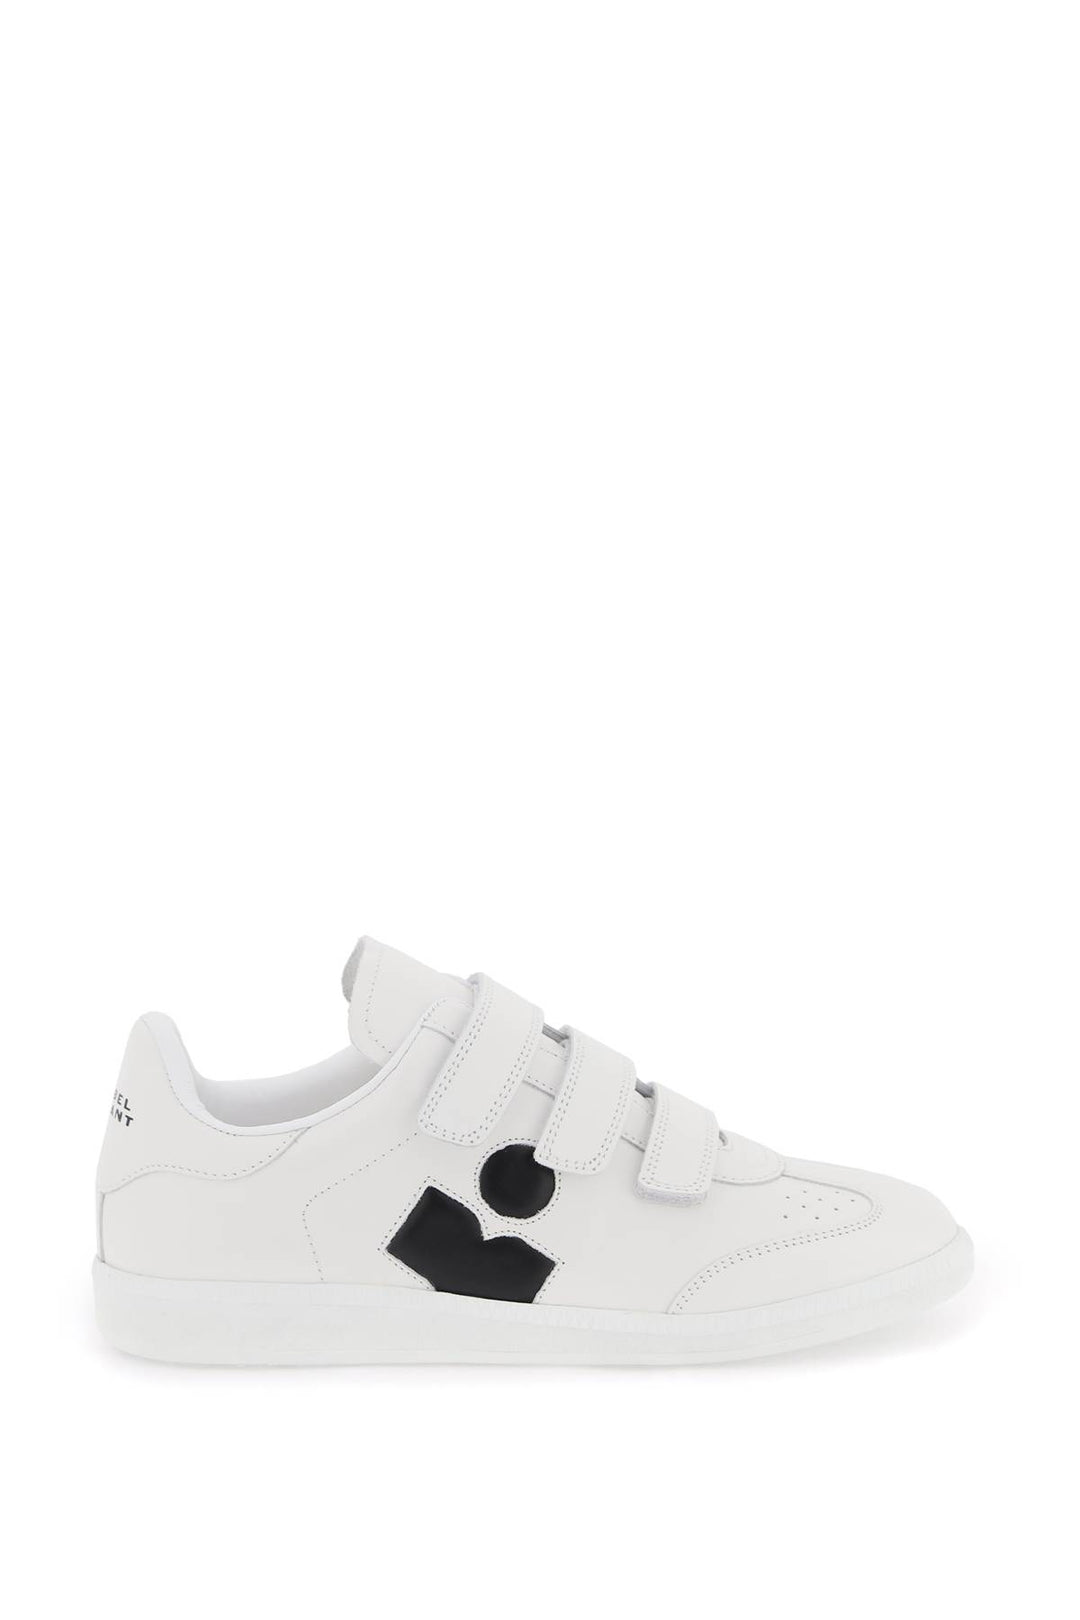 Isabel Marant Etoile Beth Leather Sneakers   White